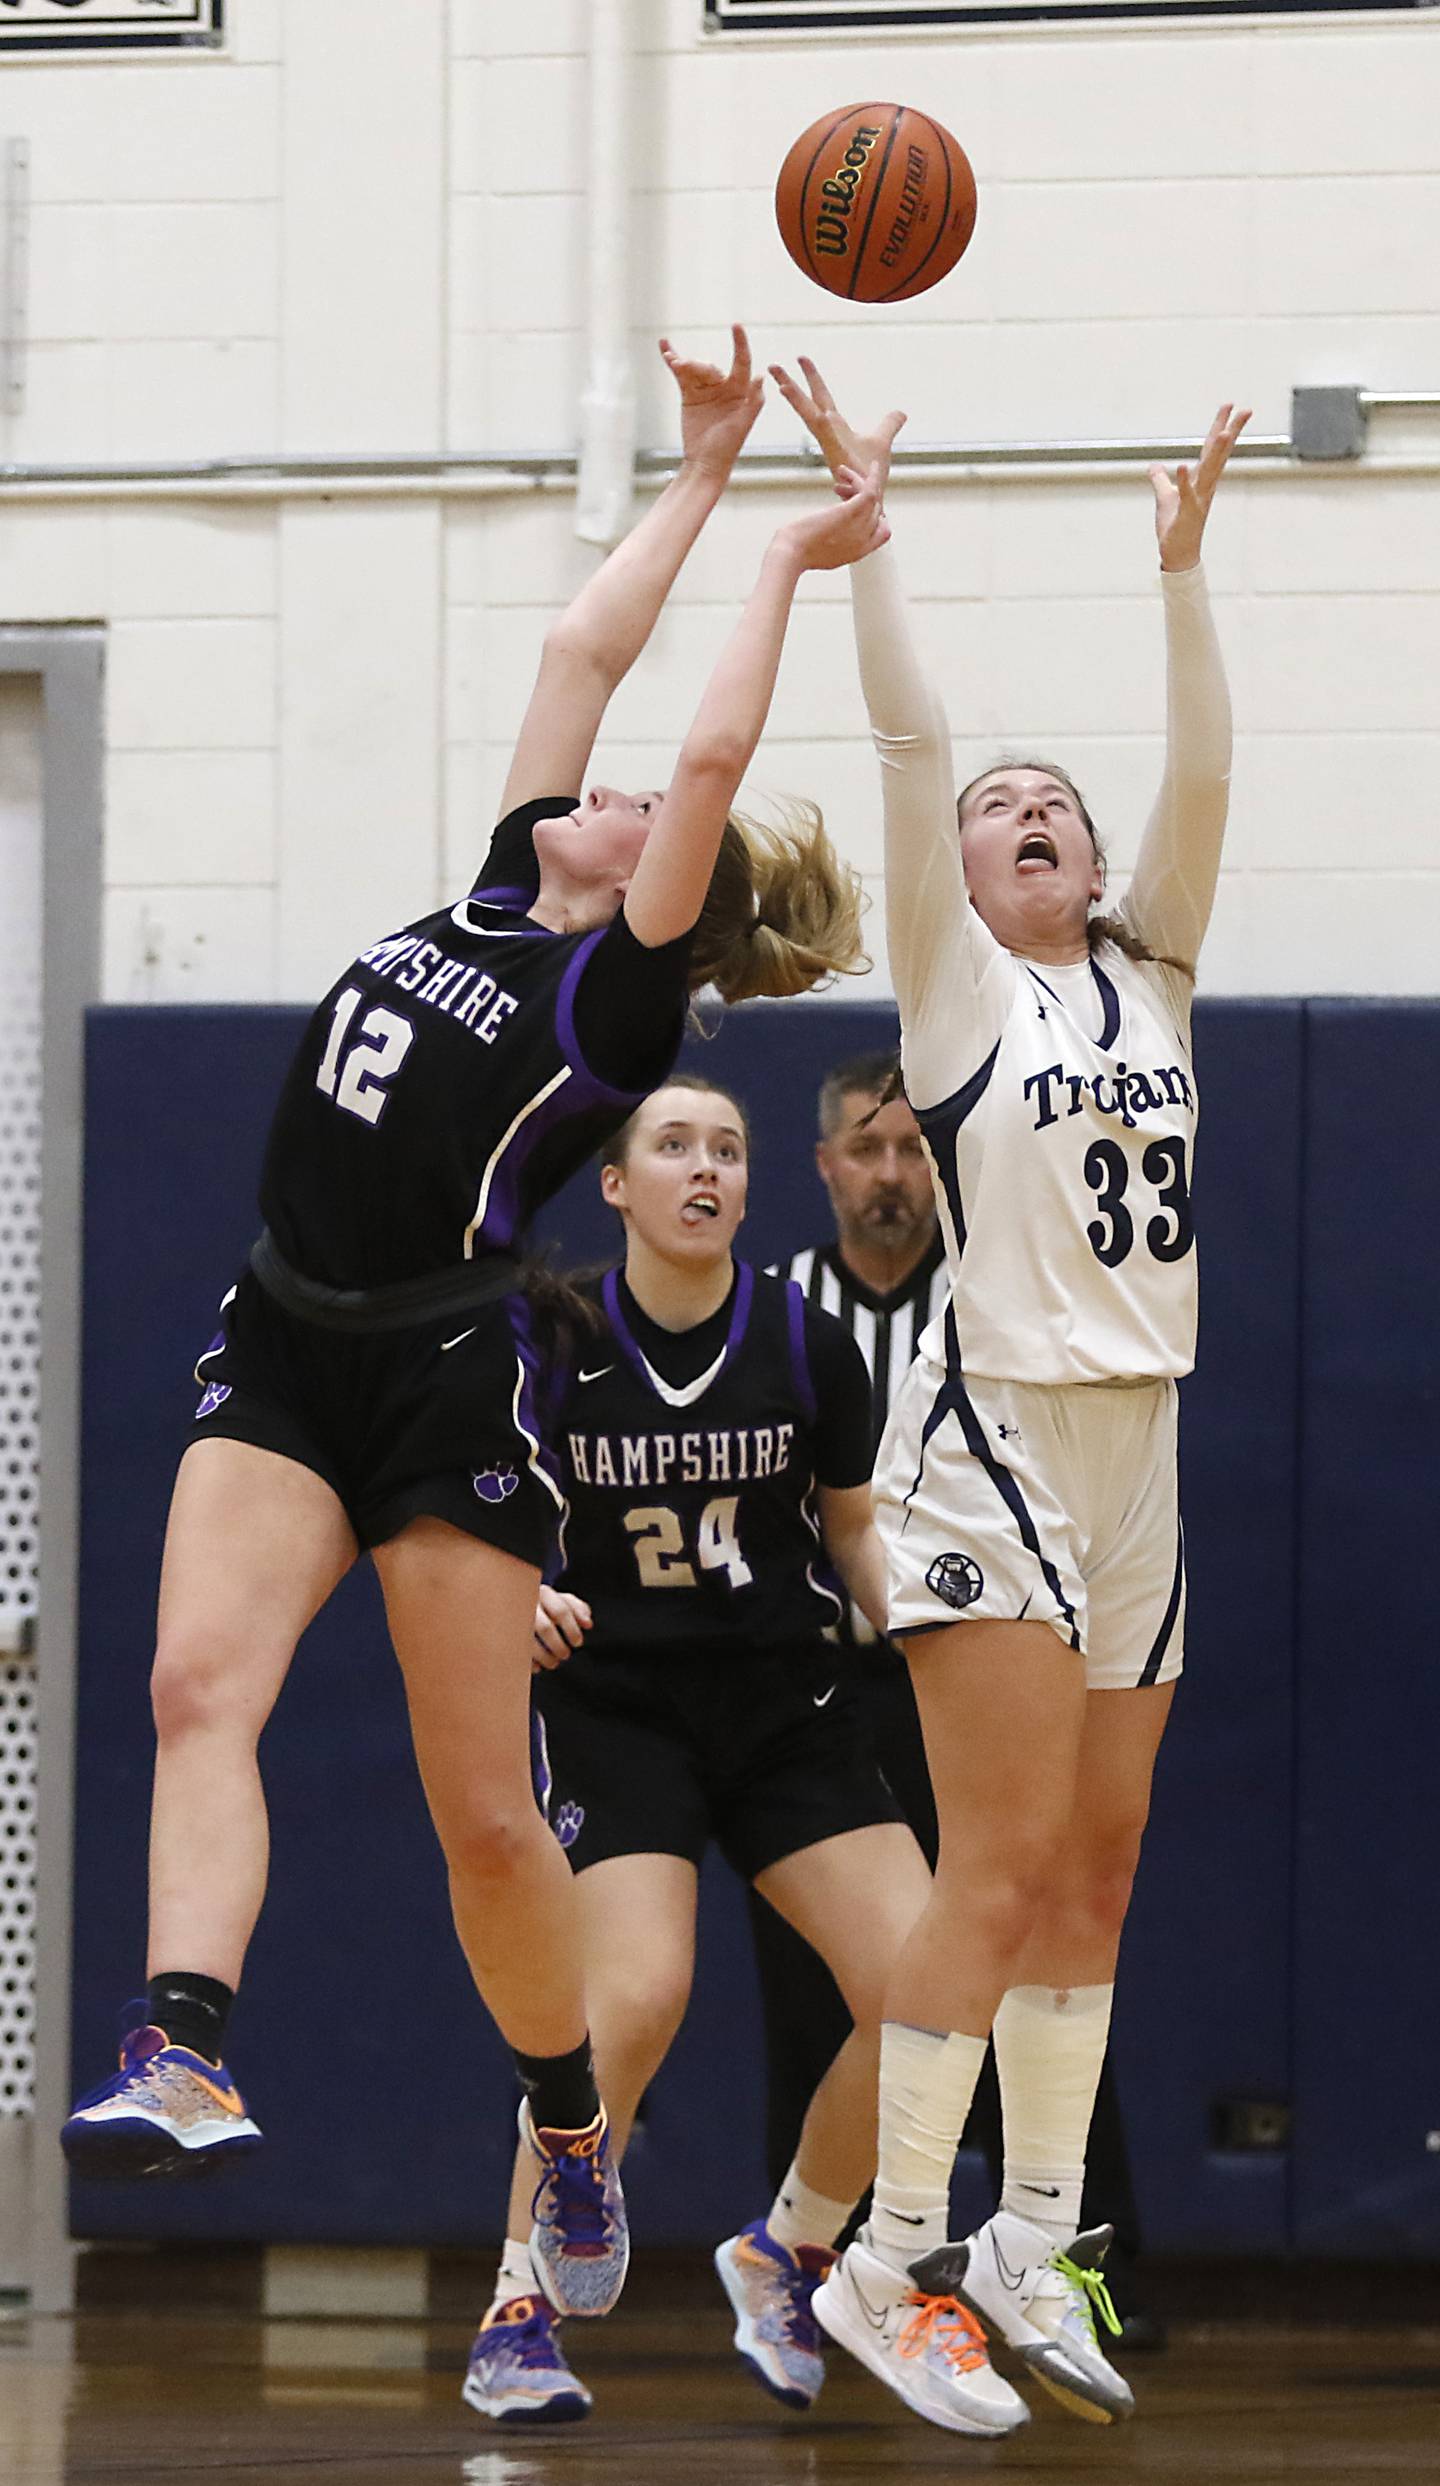 Hampshire's Kaitlyn Milison knocks a pass away from Cary-Grove's Ellie Mjaanes as her teammate. Hampshire's Whitney Thompson, tries to guard Mjaanes during a Fox Valley Conference girls basketball game Friday, Dec.2, 2022, between Cary-Grove and Hampshire at Cary-Grove High School in Cary.